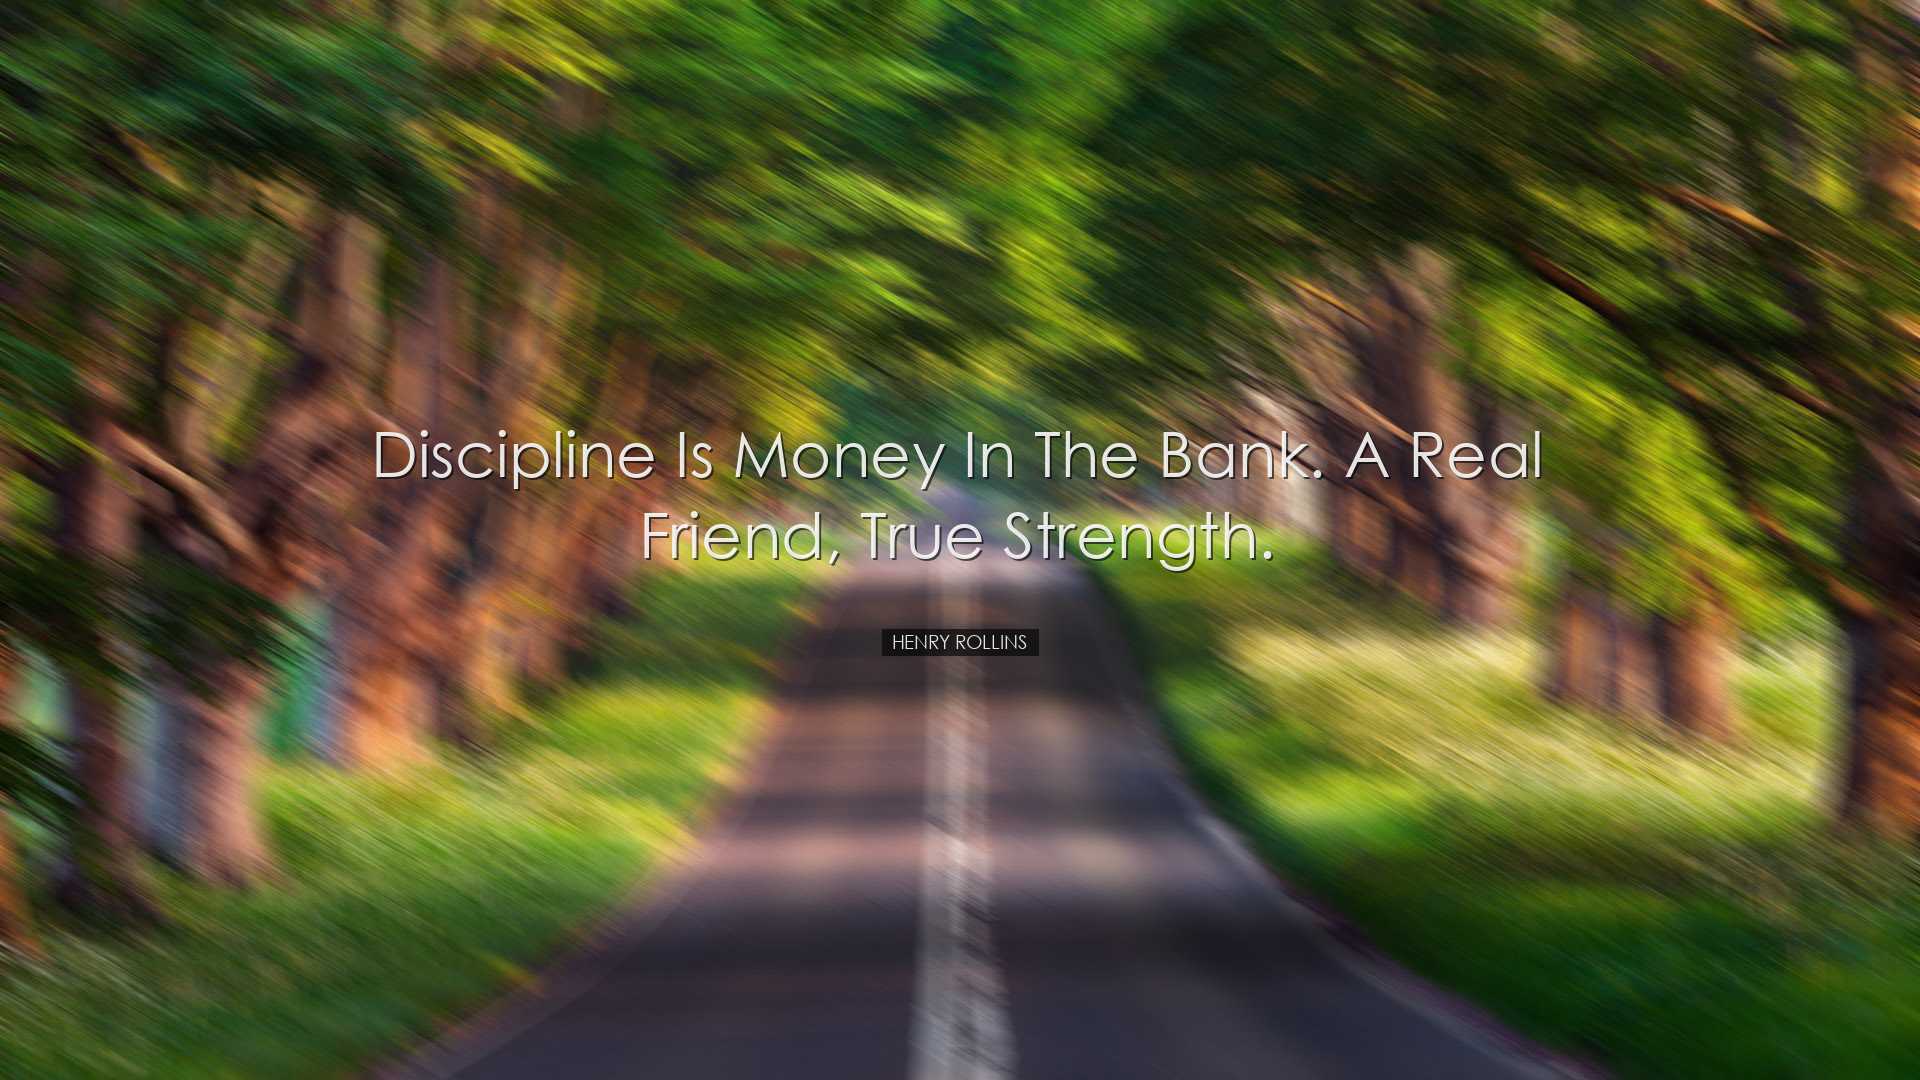 Discipline is money in the bank. A real friend, true strength. - H